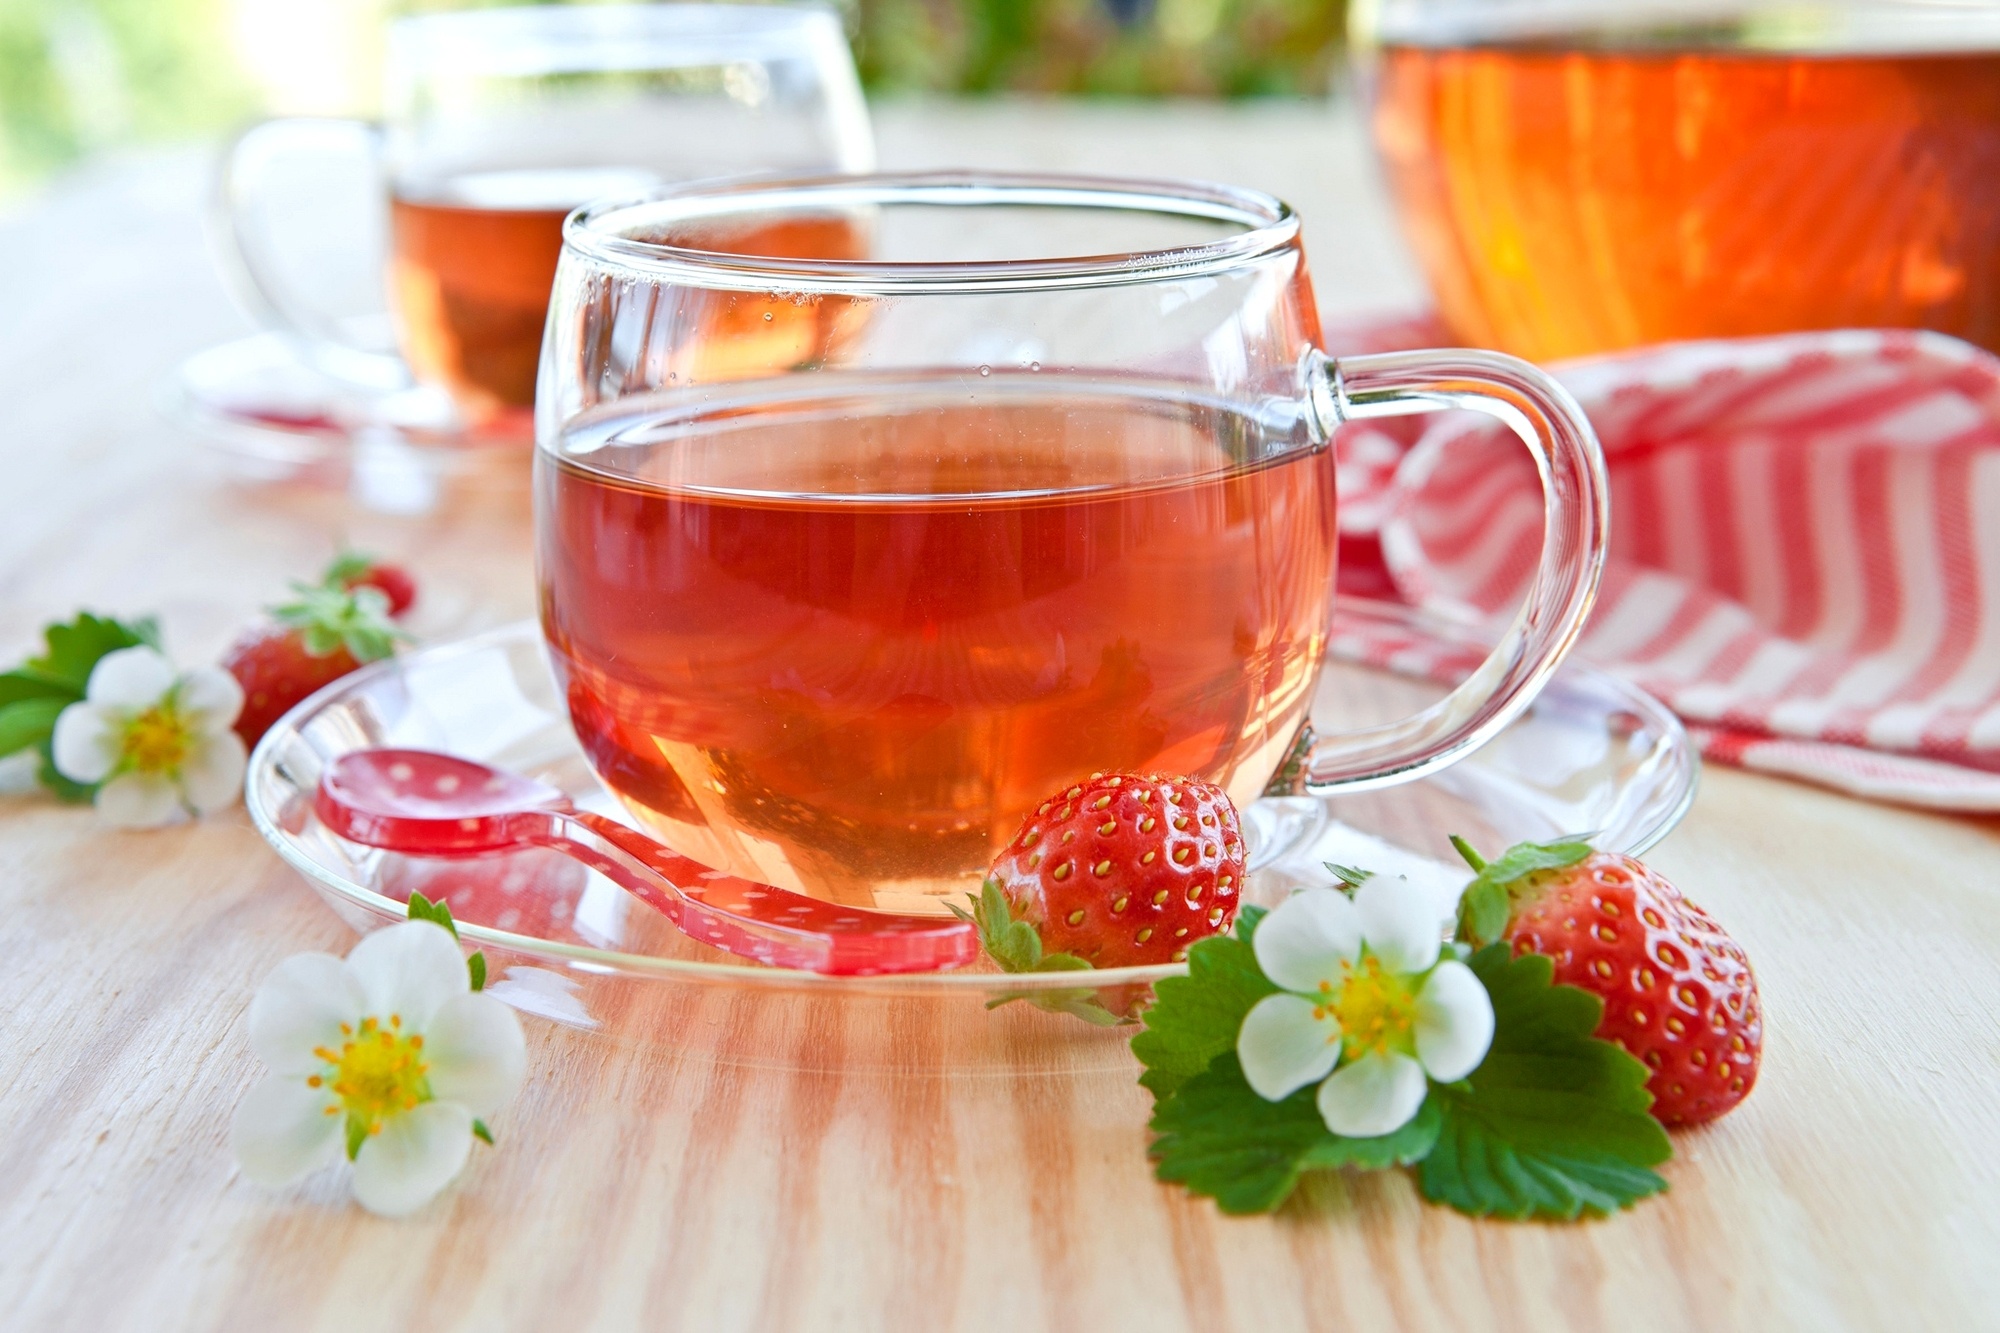 Refreshing strawberry drinks, Tea served creatively, Vibrant cup imagery, Summery beverage, 2000x1340 HD Desktop